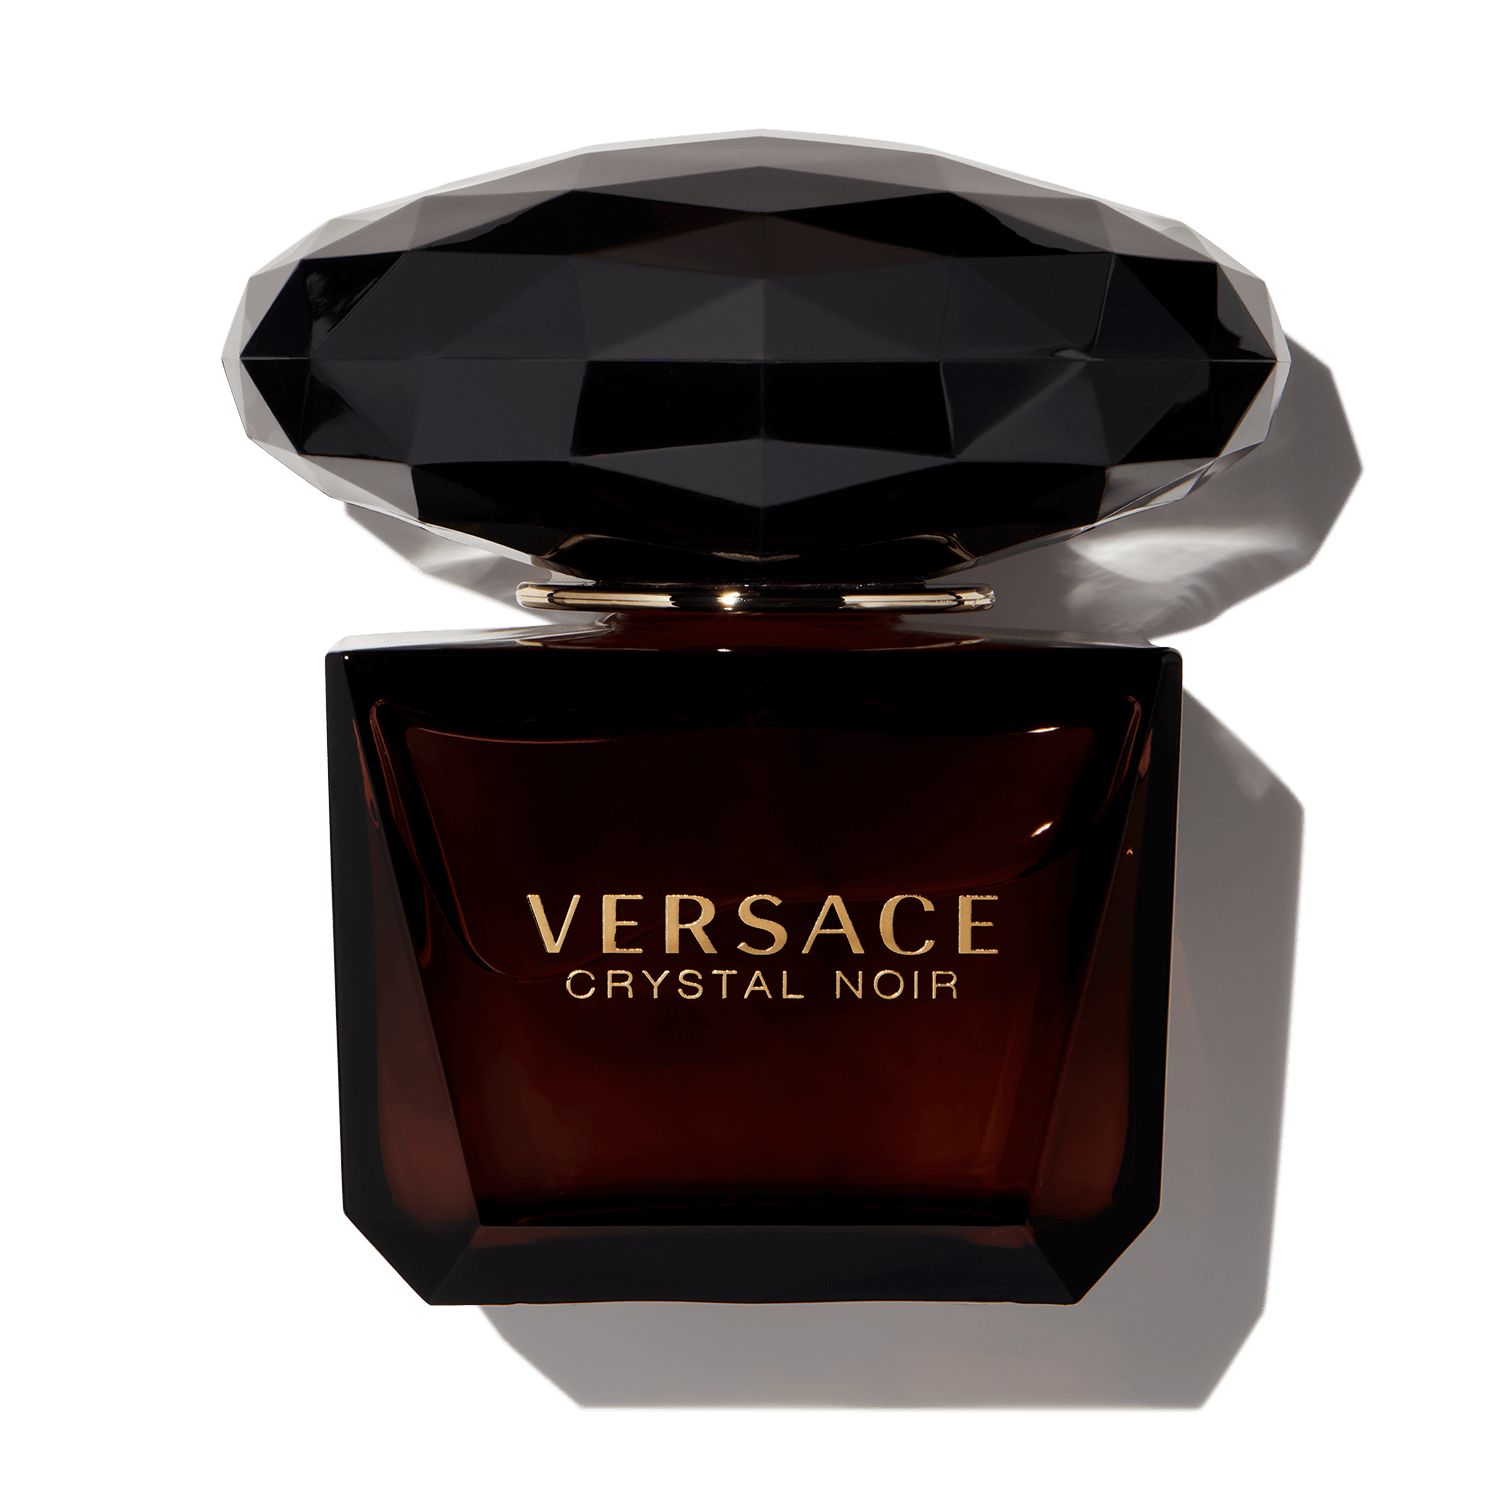 Get Versace Crystal Noir at Scentbird for $16.95 only